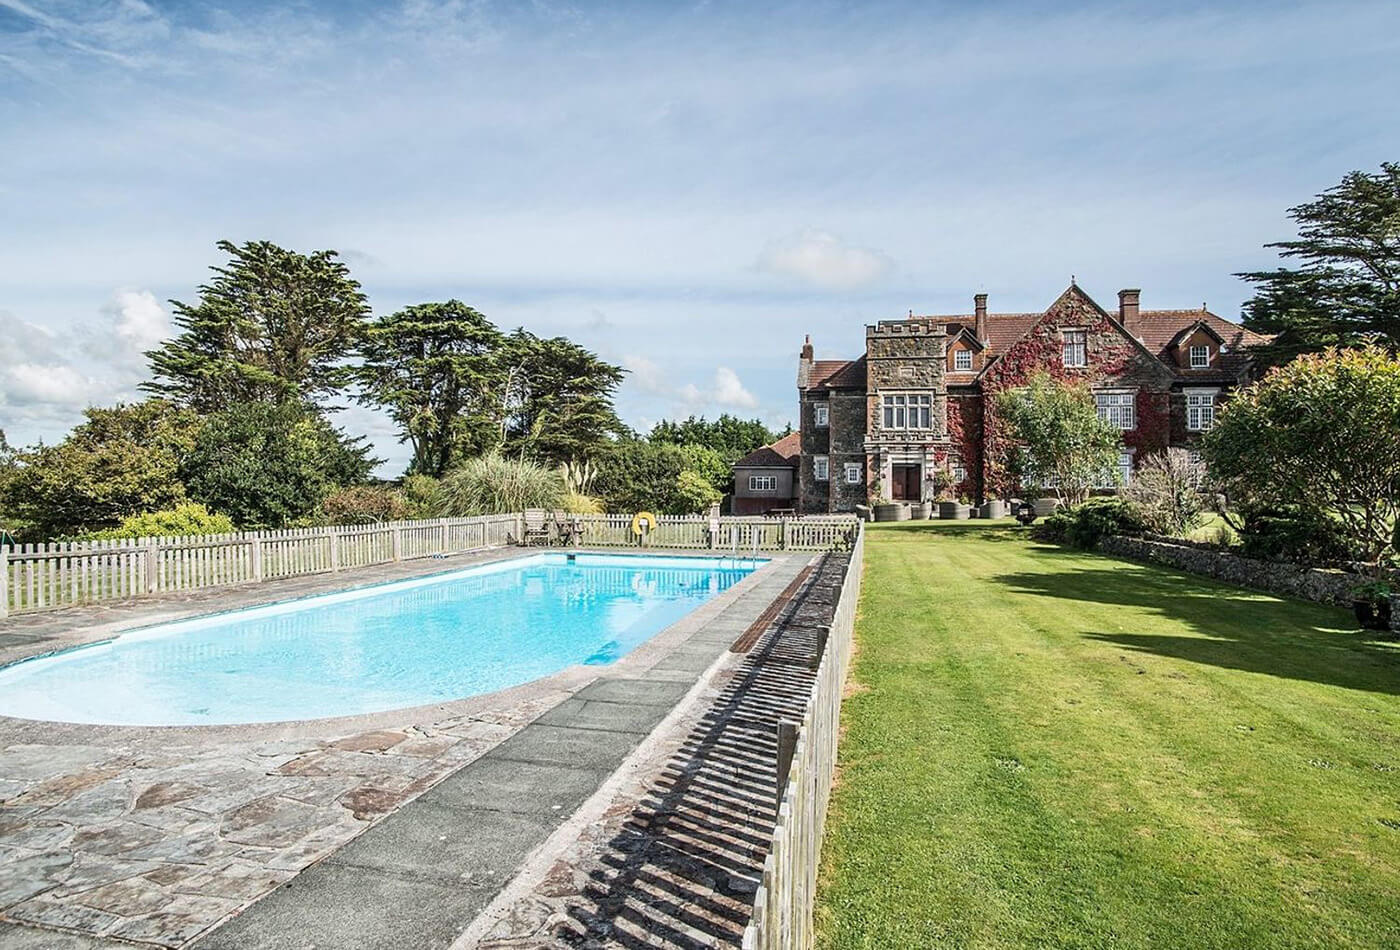 Holiday cottage with a pool - outdoor pool with Alston Hall in the background.